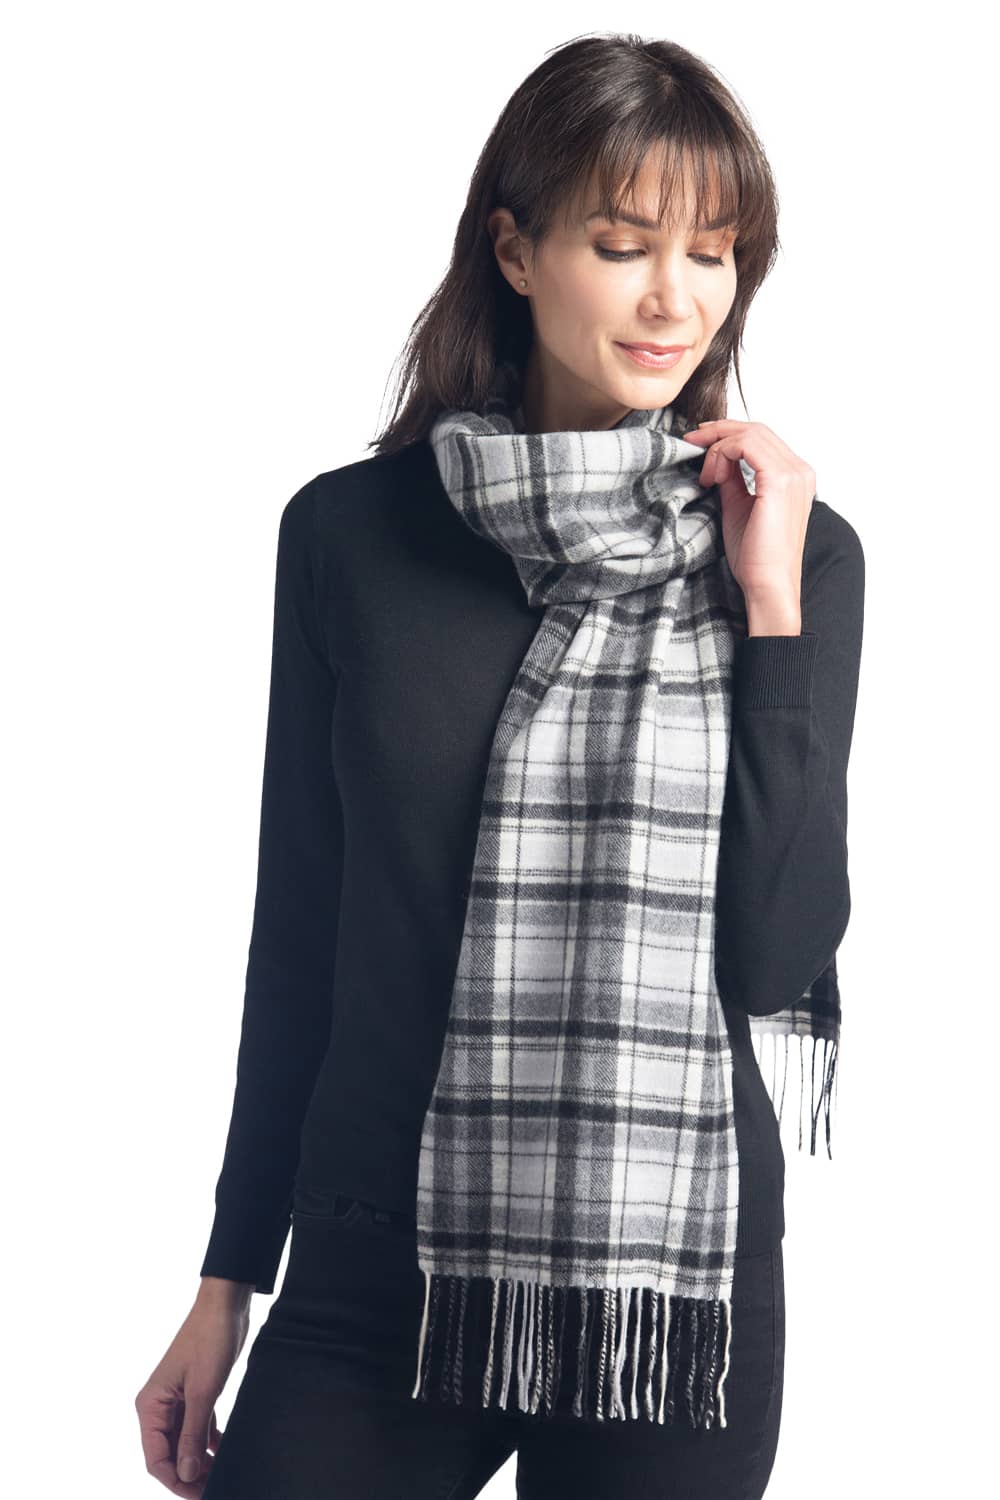 Women's Classic 100% Pure Cashmere Scarf Womens>Accessories>Scarf Fishers Finery Black White Gray Plaid One Size 